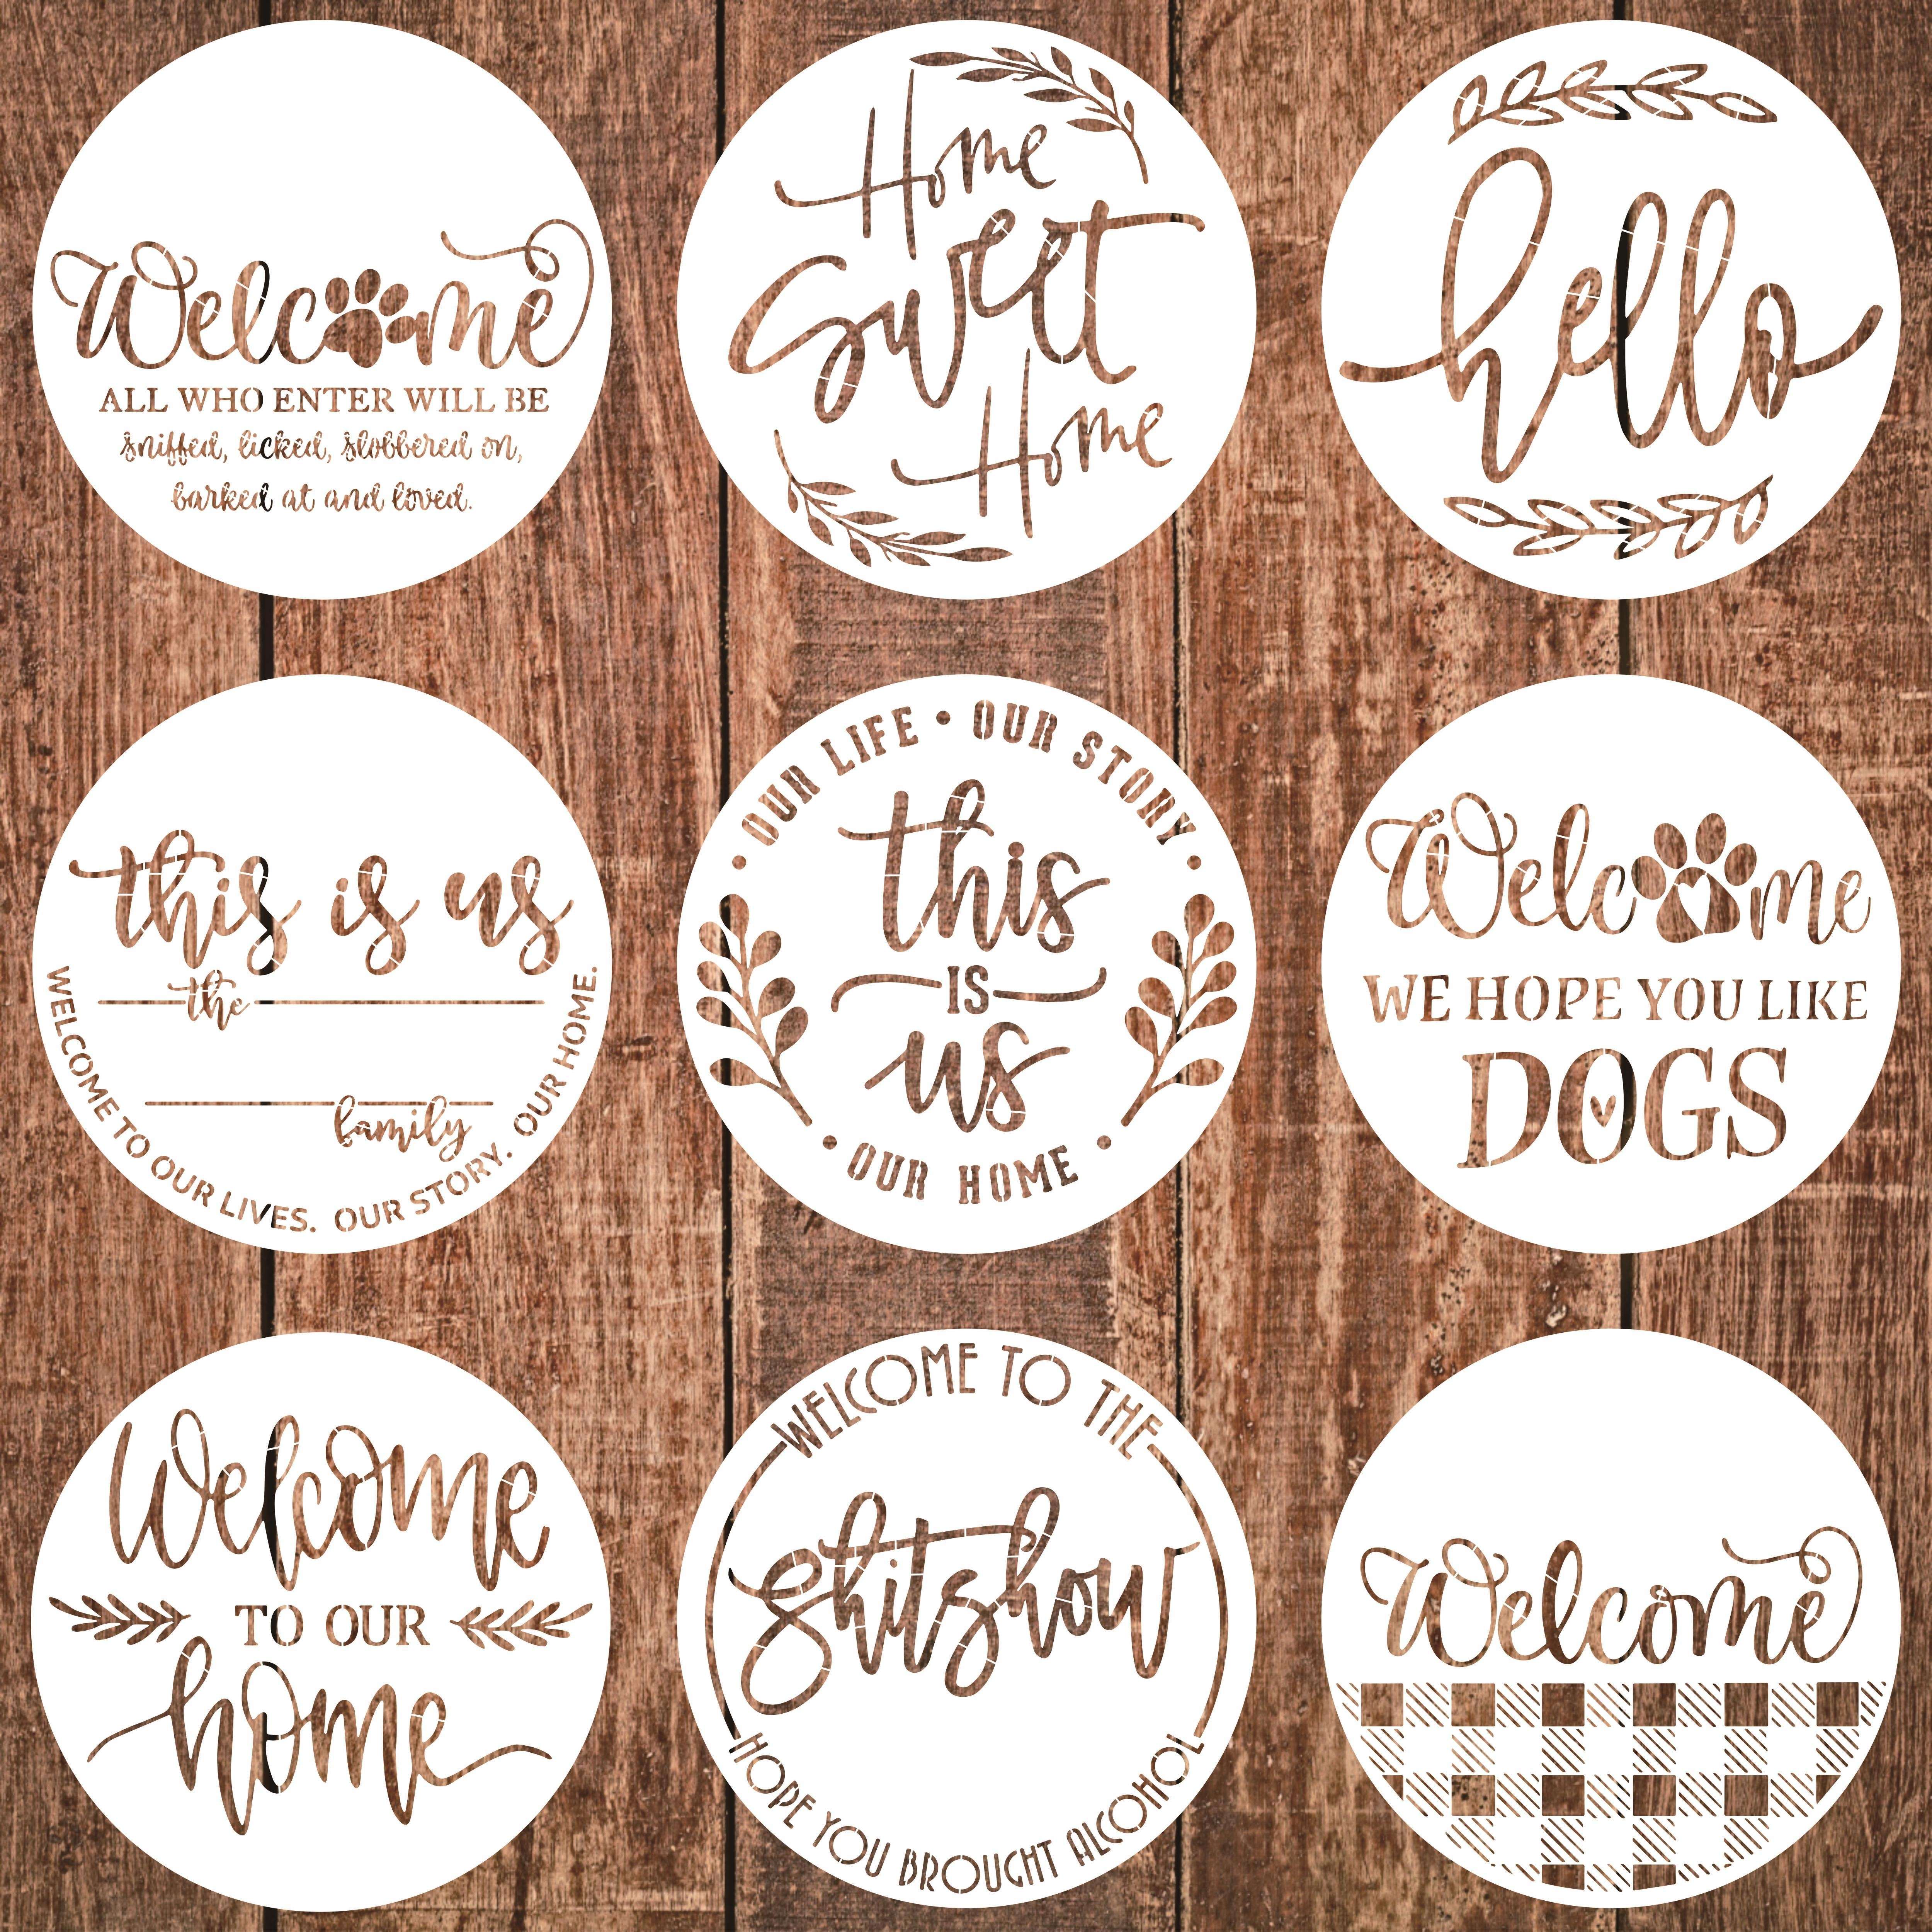 12pcs Welcome Hello Stencils For Painting On Wood, 12 Half Round Reusable  Large Welcome Sign Door Hanger Stencils For Wood Sign Art Templates Plastic